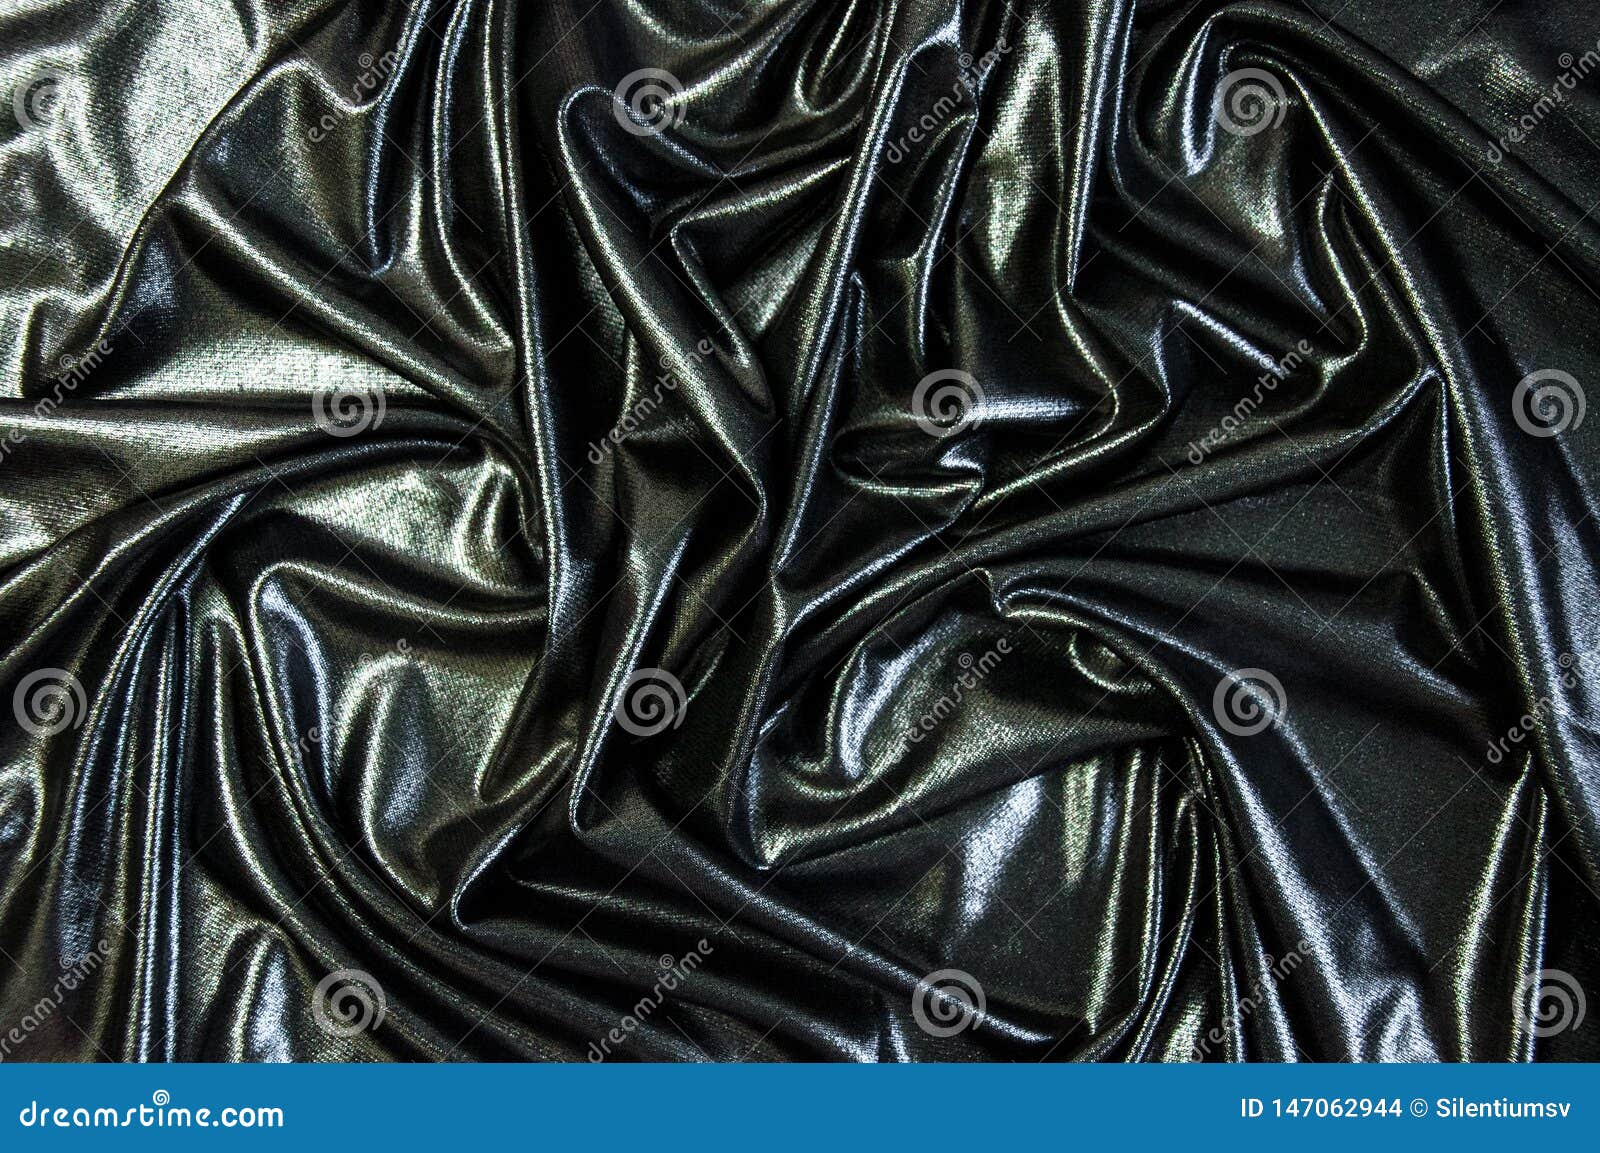 Black Cloth Waves Abstract Textile Background. Fabric As Pitch Oil. Dark  Wallpaper. Stock Photo - Image of elegance, passion: 147062944